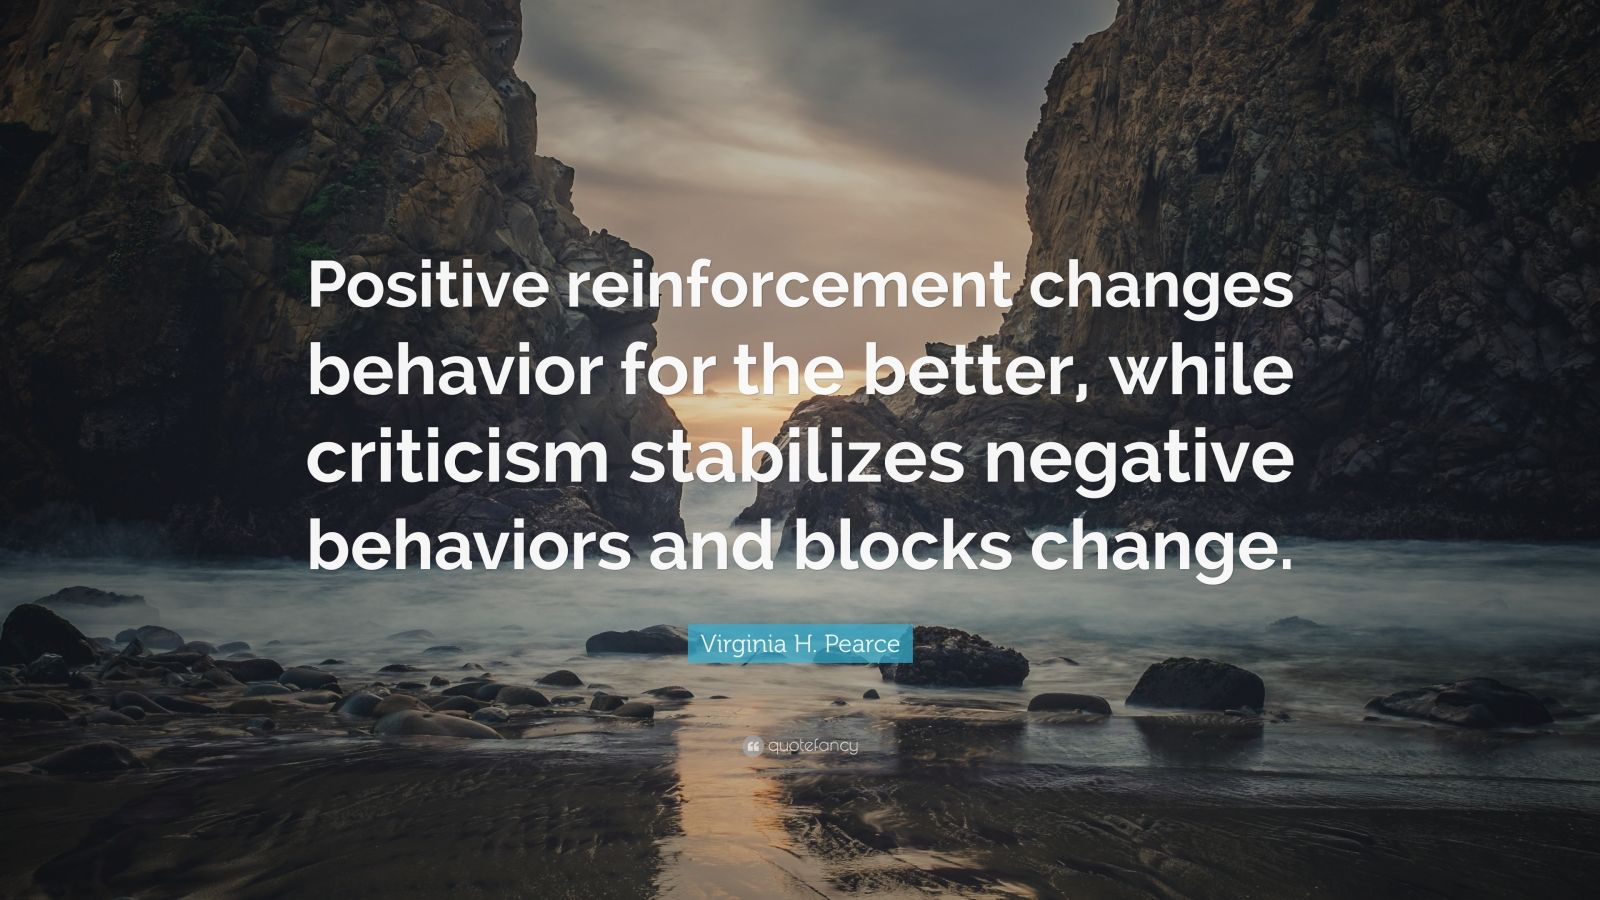 Virginia H. Pearce Quote: “Positive reinforcement changes behavior for